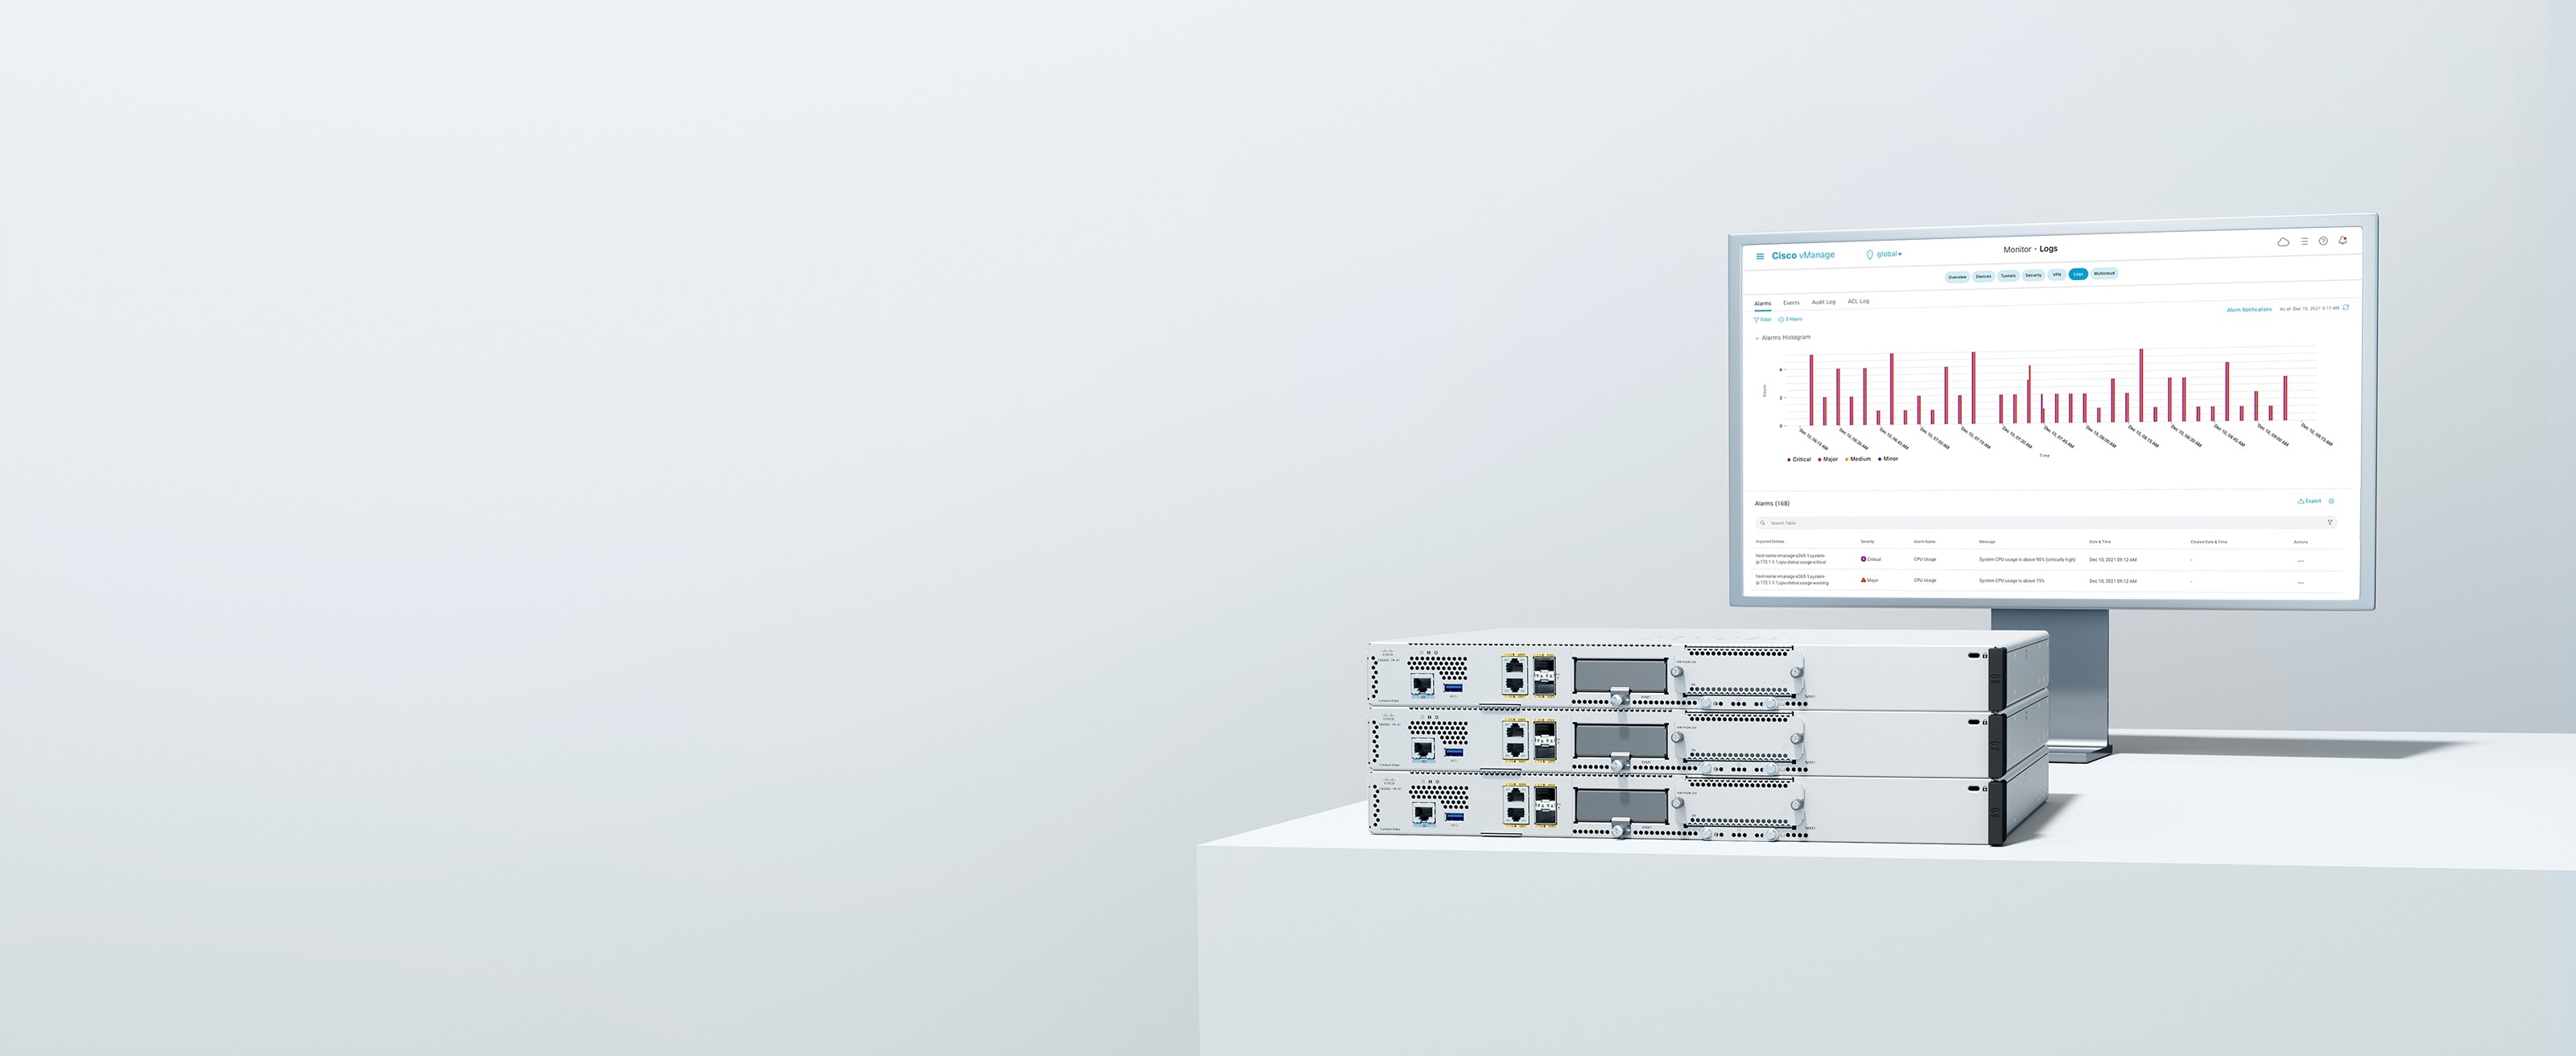 Catalyst 8200 Series Edge Platforms and Cisco vManage user interface